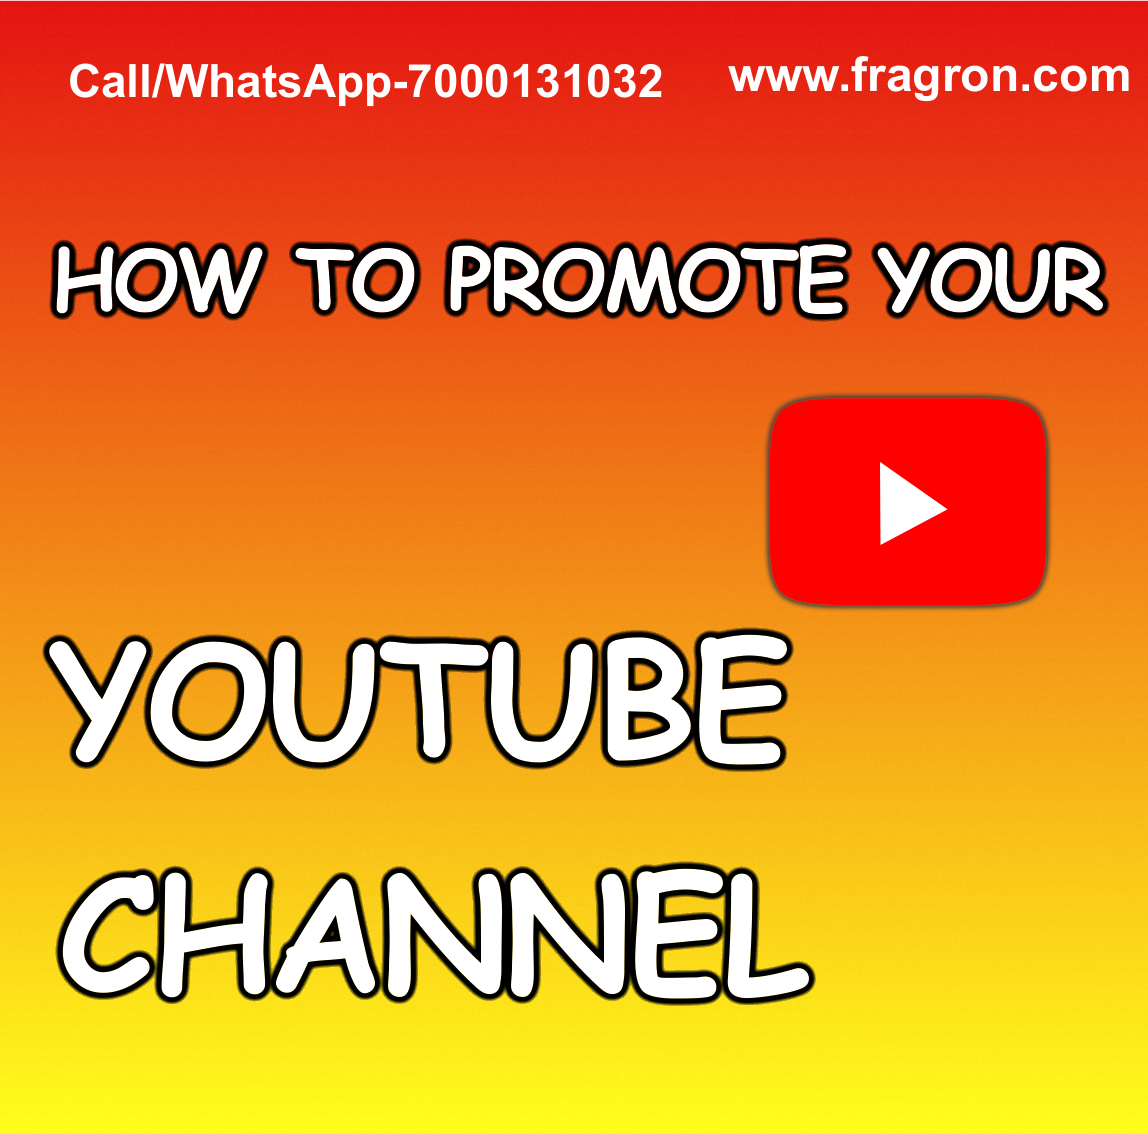 How To Promote your Youtube Channel